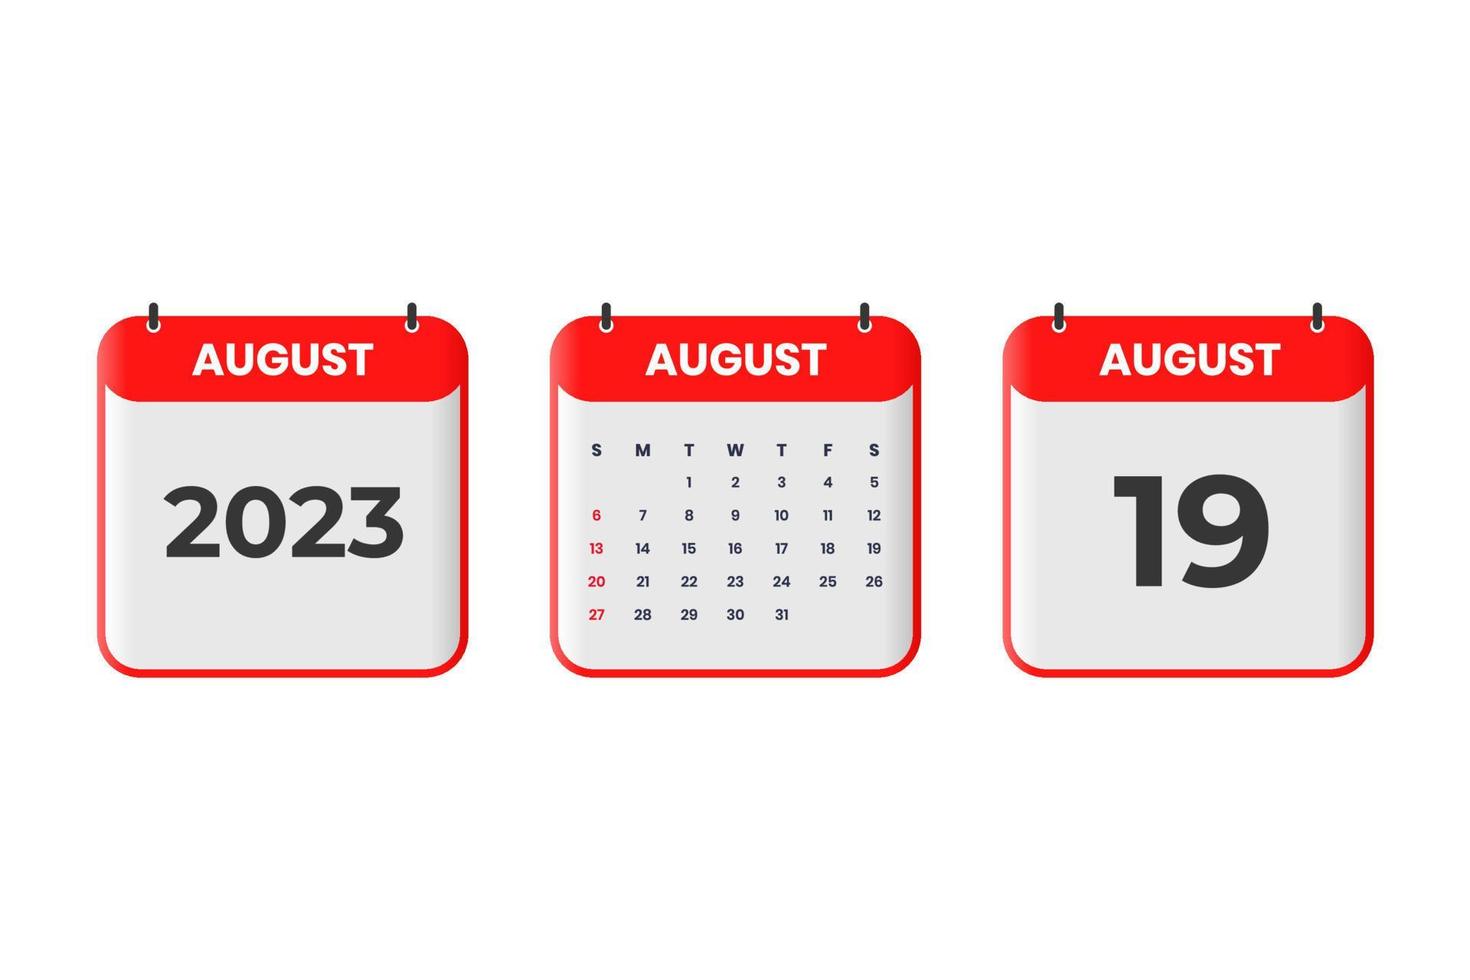 August 2023 calendar design. 19th August 2023 calendar icon for schedule, appointment, important date concept vector